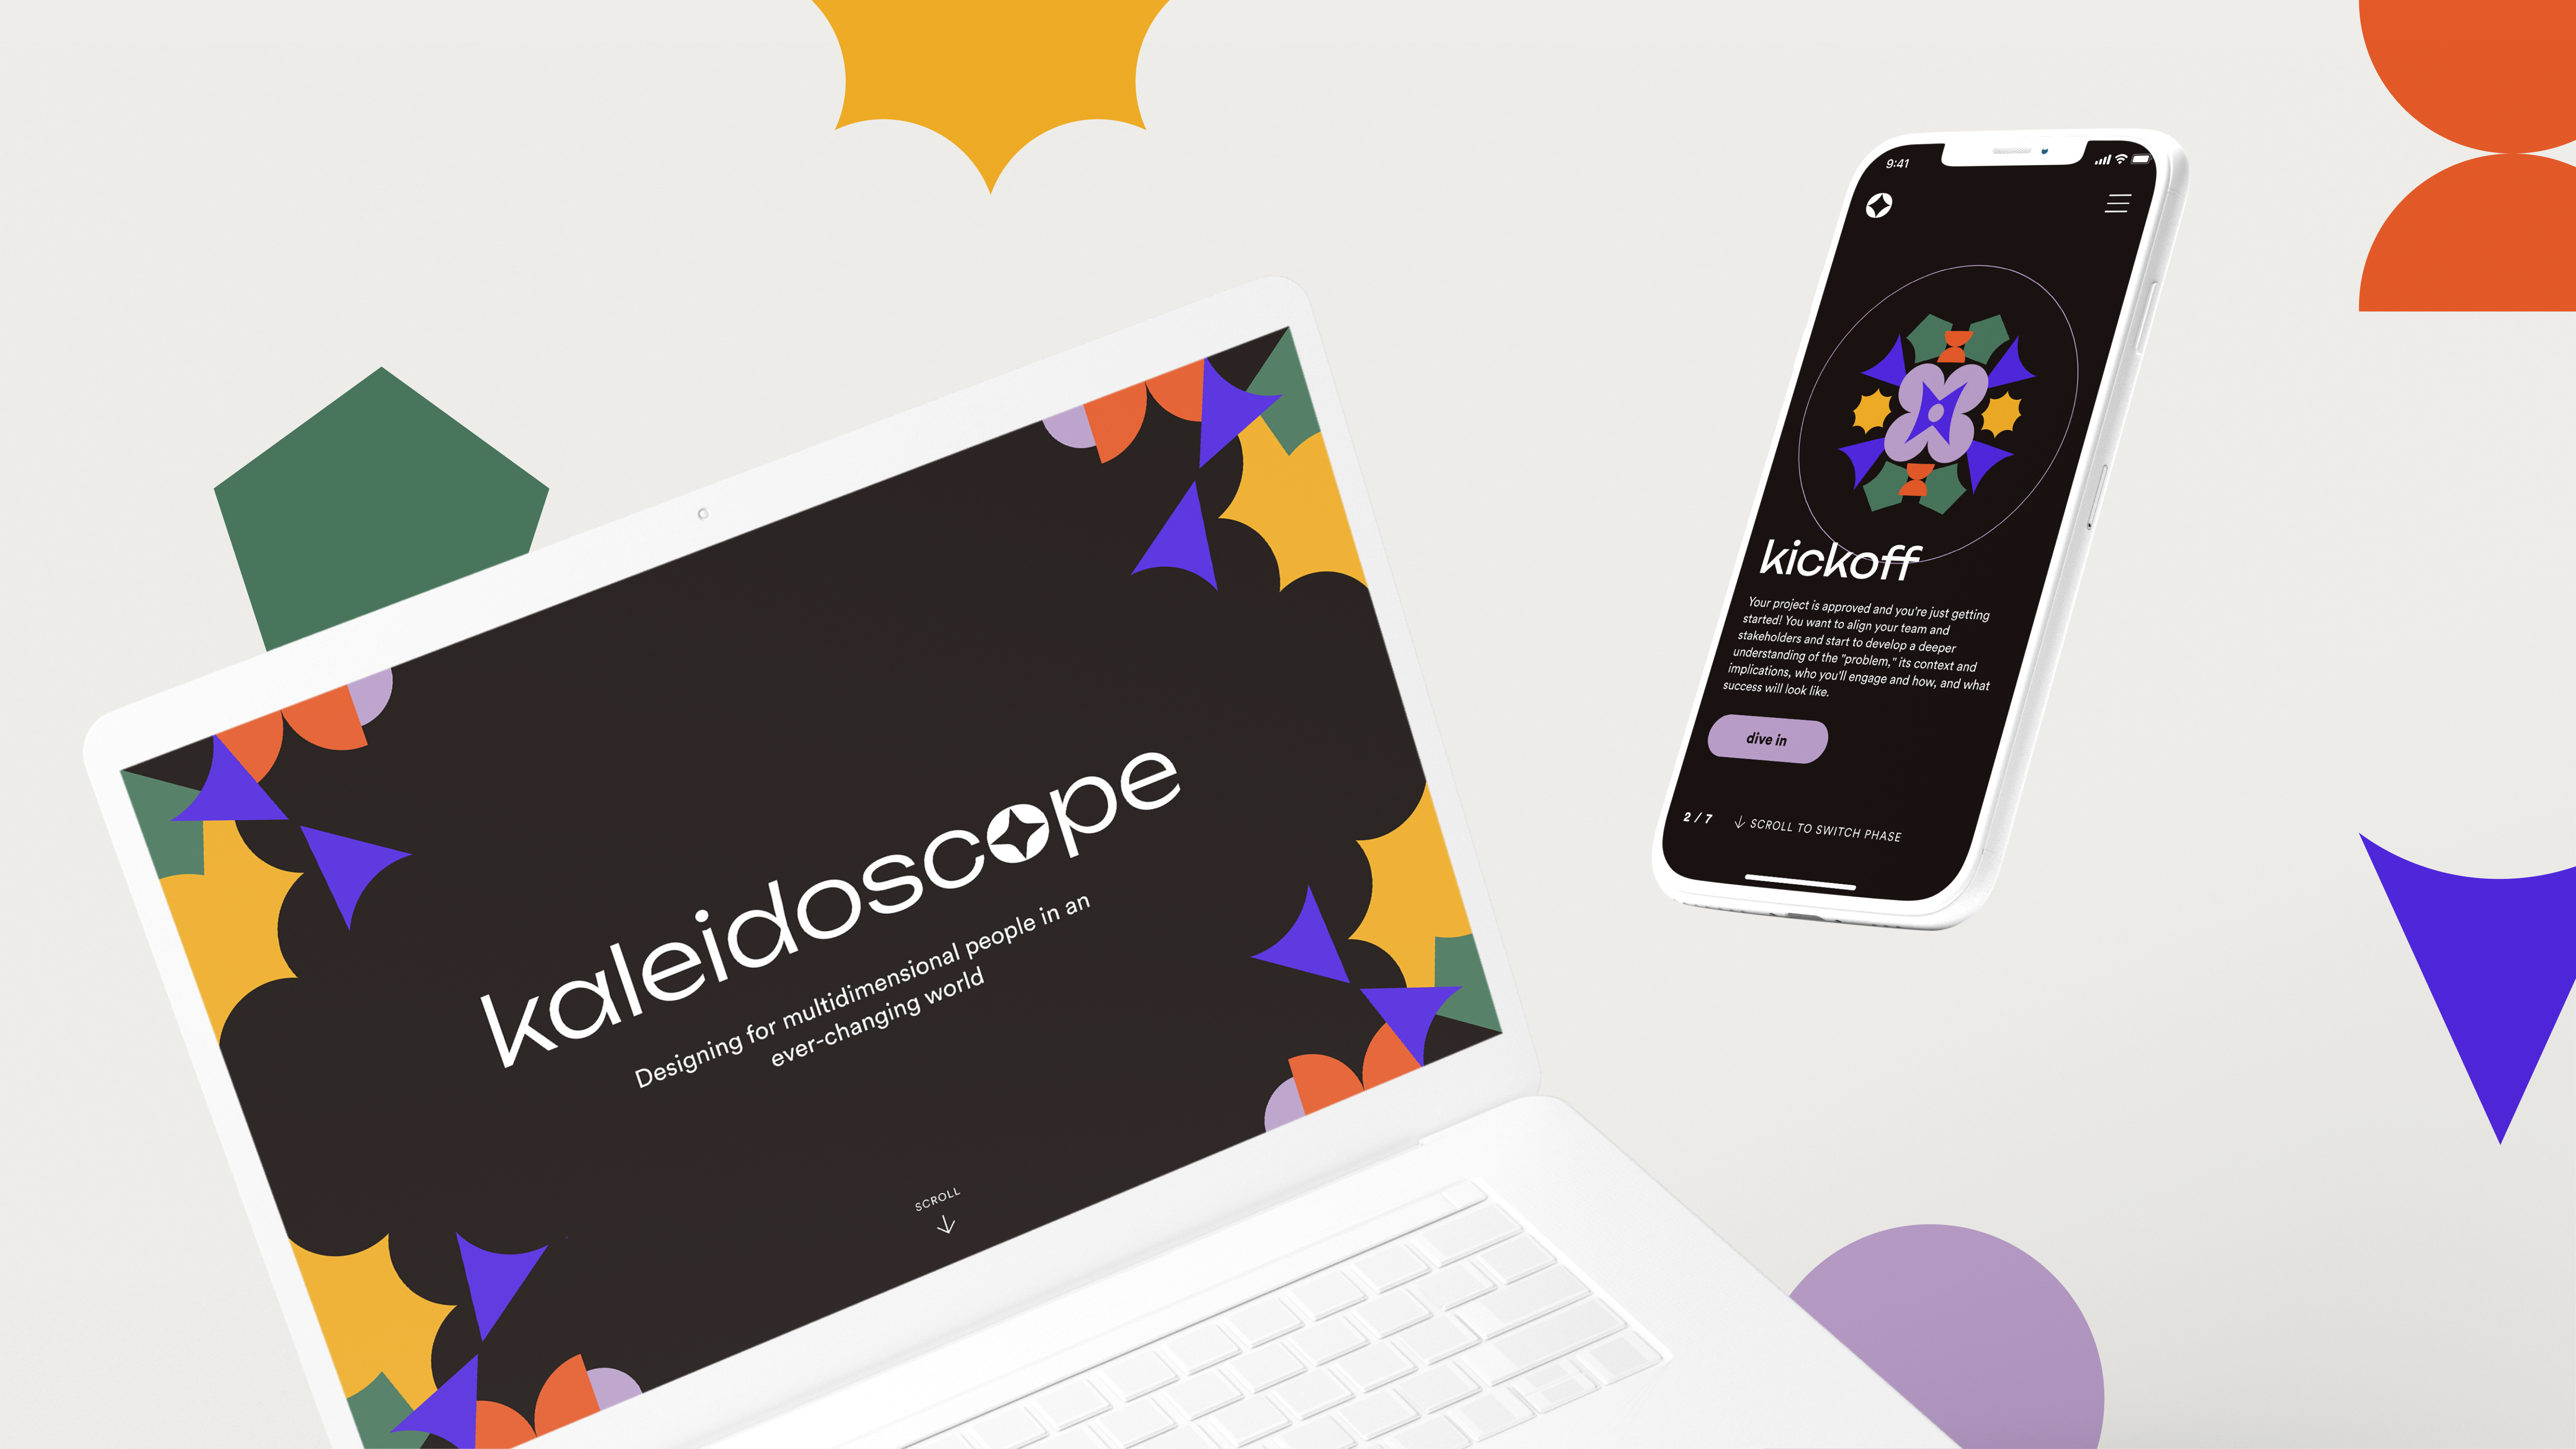 A desktop and mobile view of the Kaleidoscope app